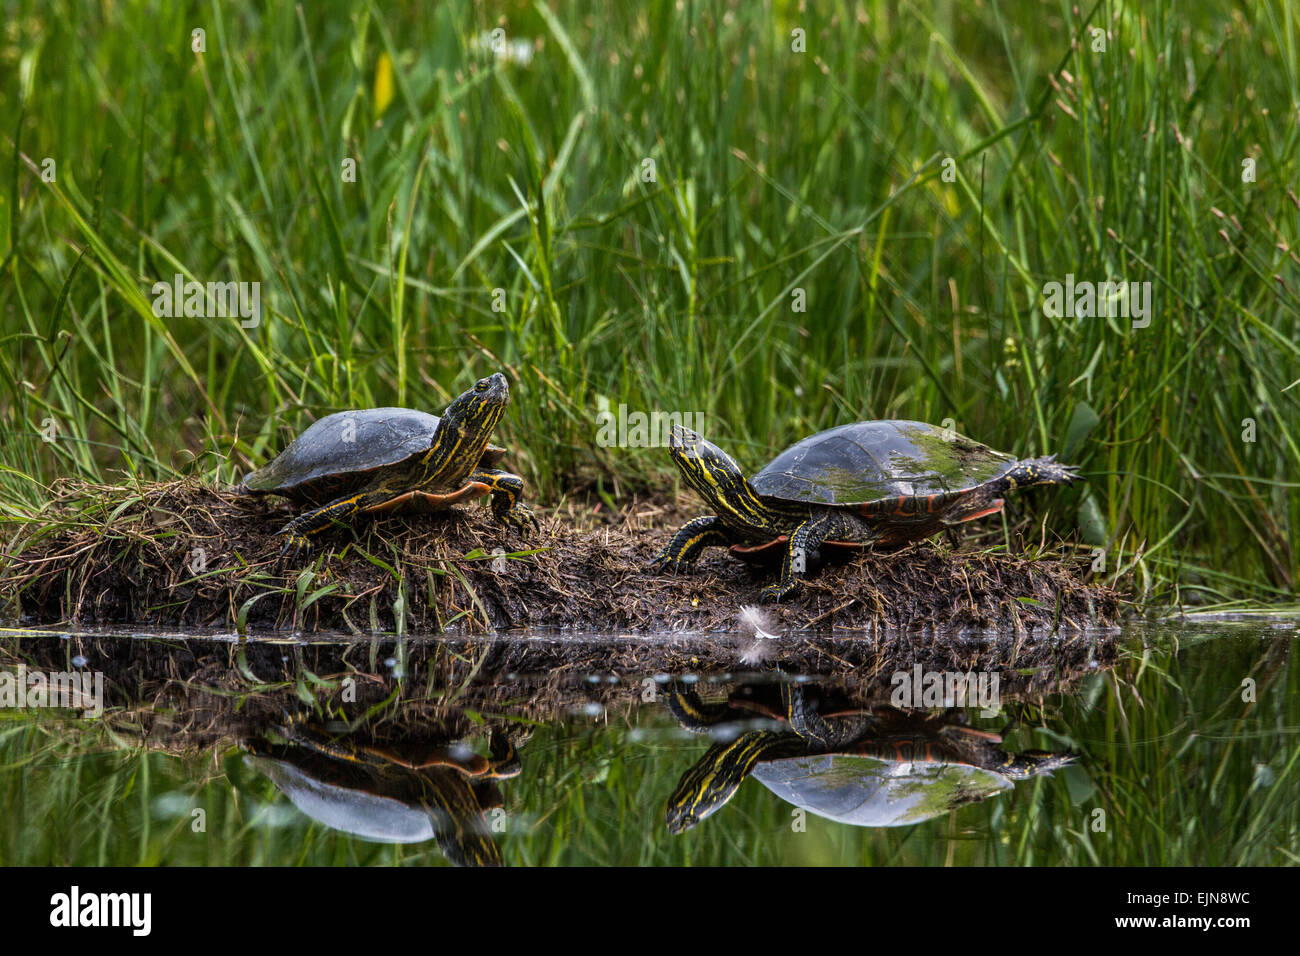 Two painted turtles Stock Photo